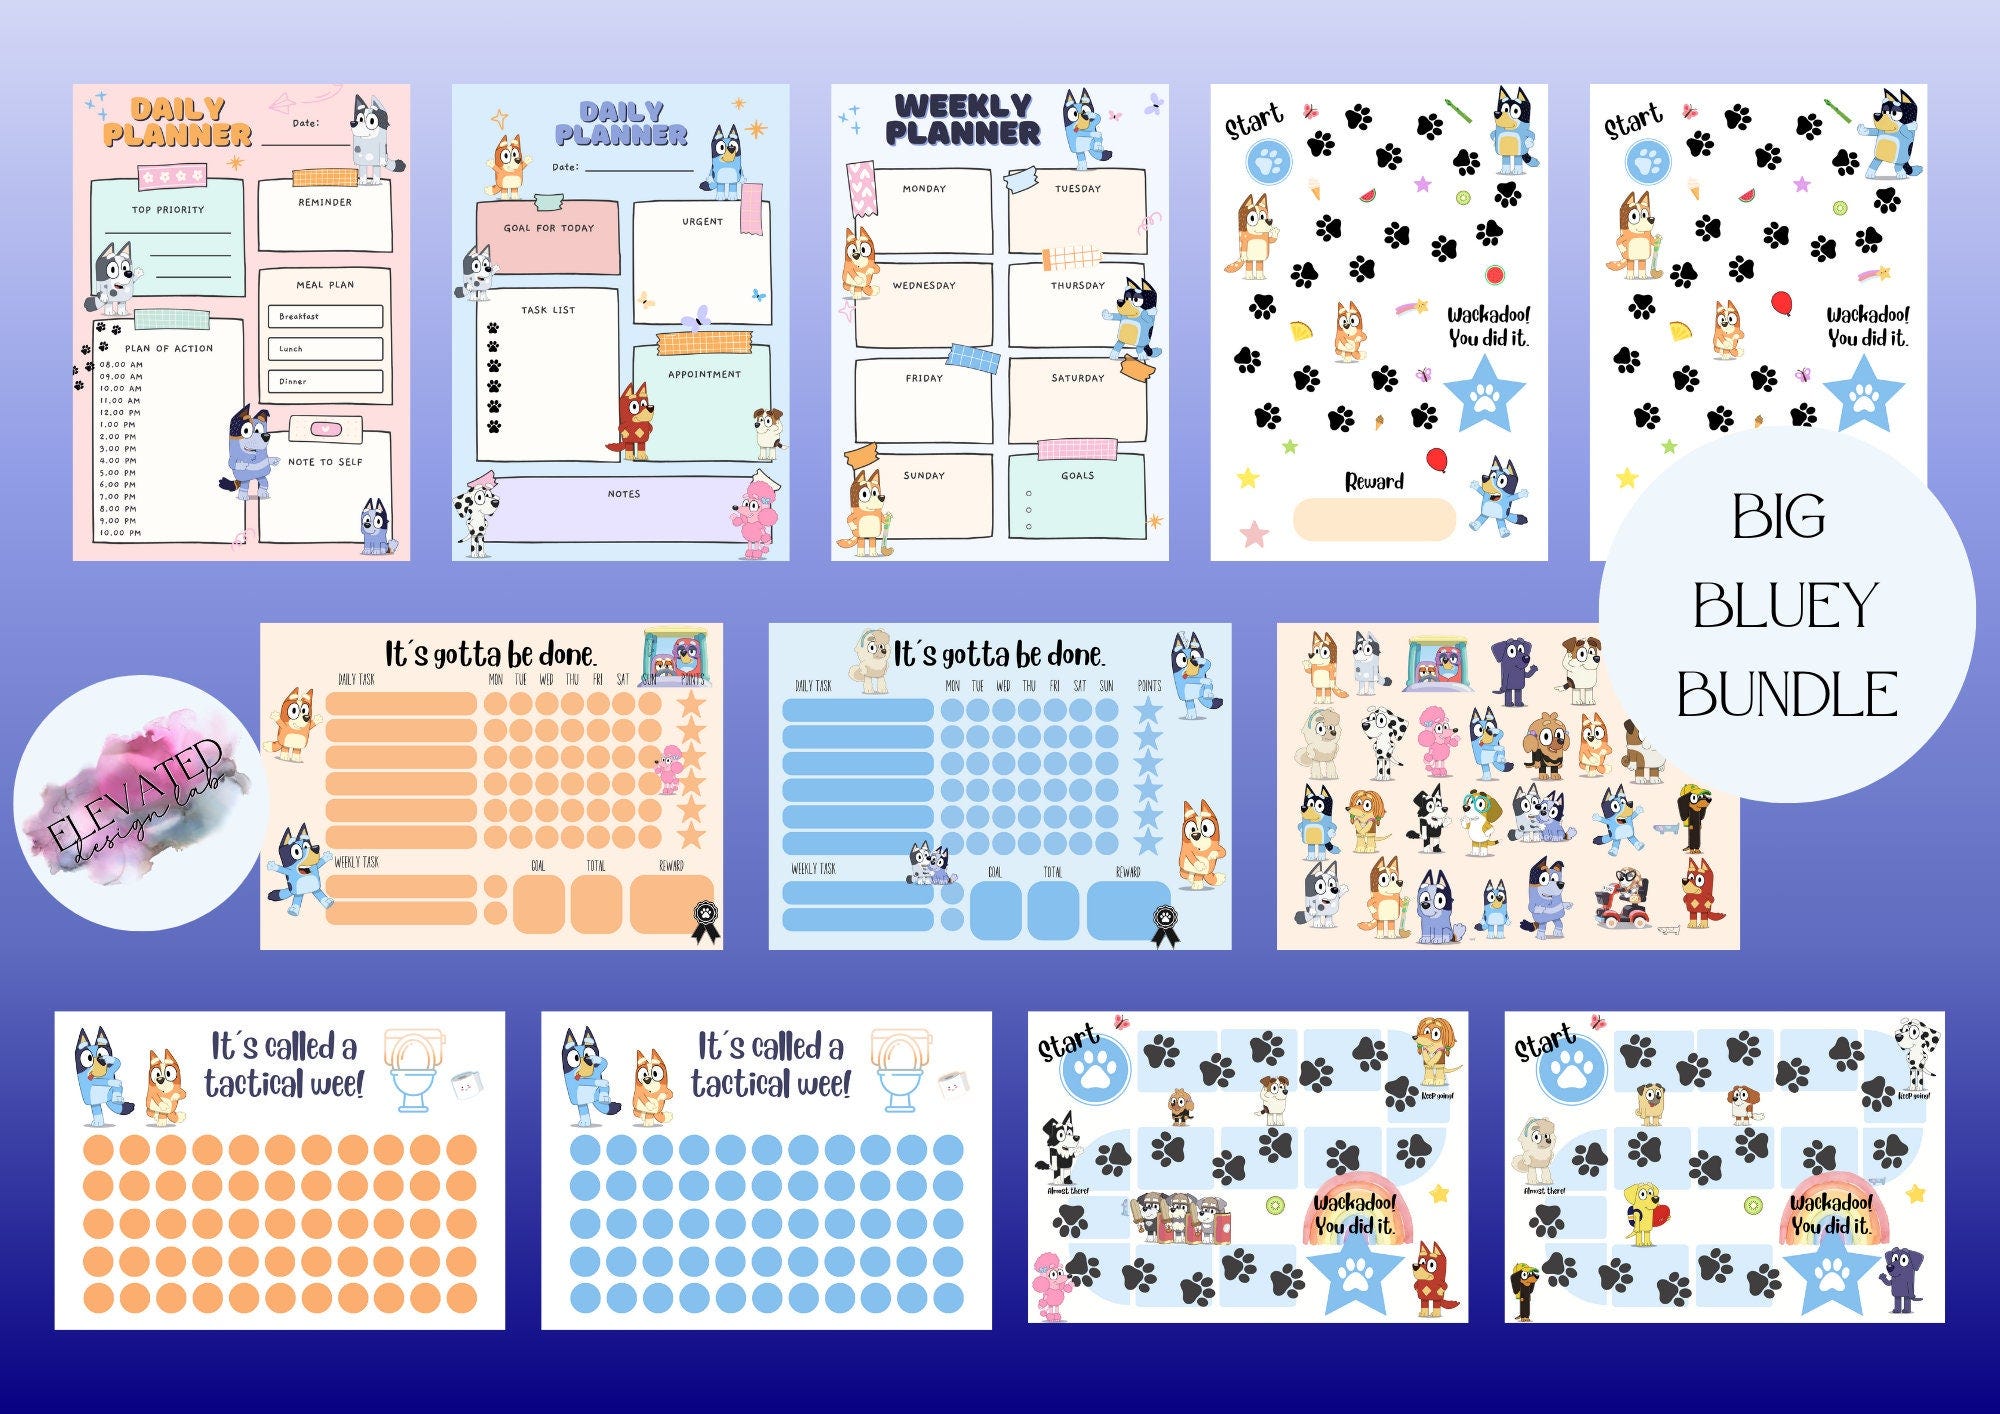 Big Bluey Bundle - get all your fave Bluey template needs all in one with this cool pack - Inc. planner, rewards, goal & toilet training.